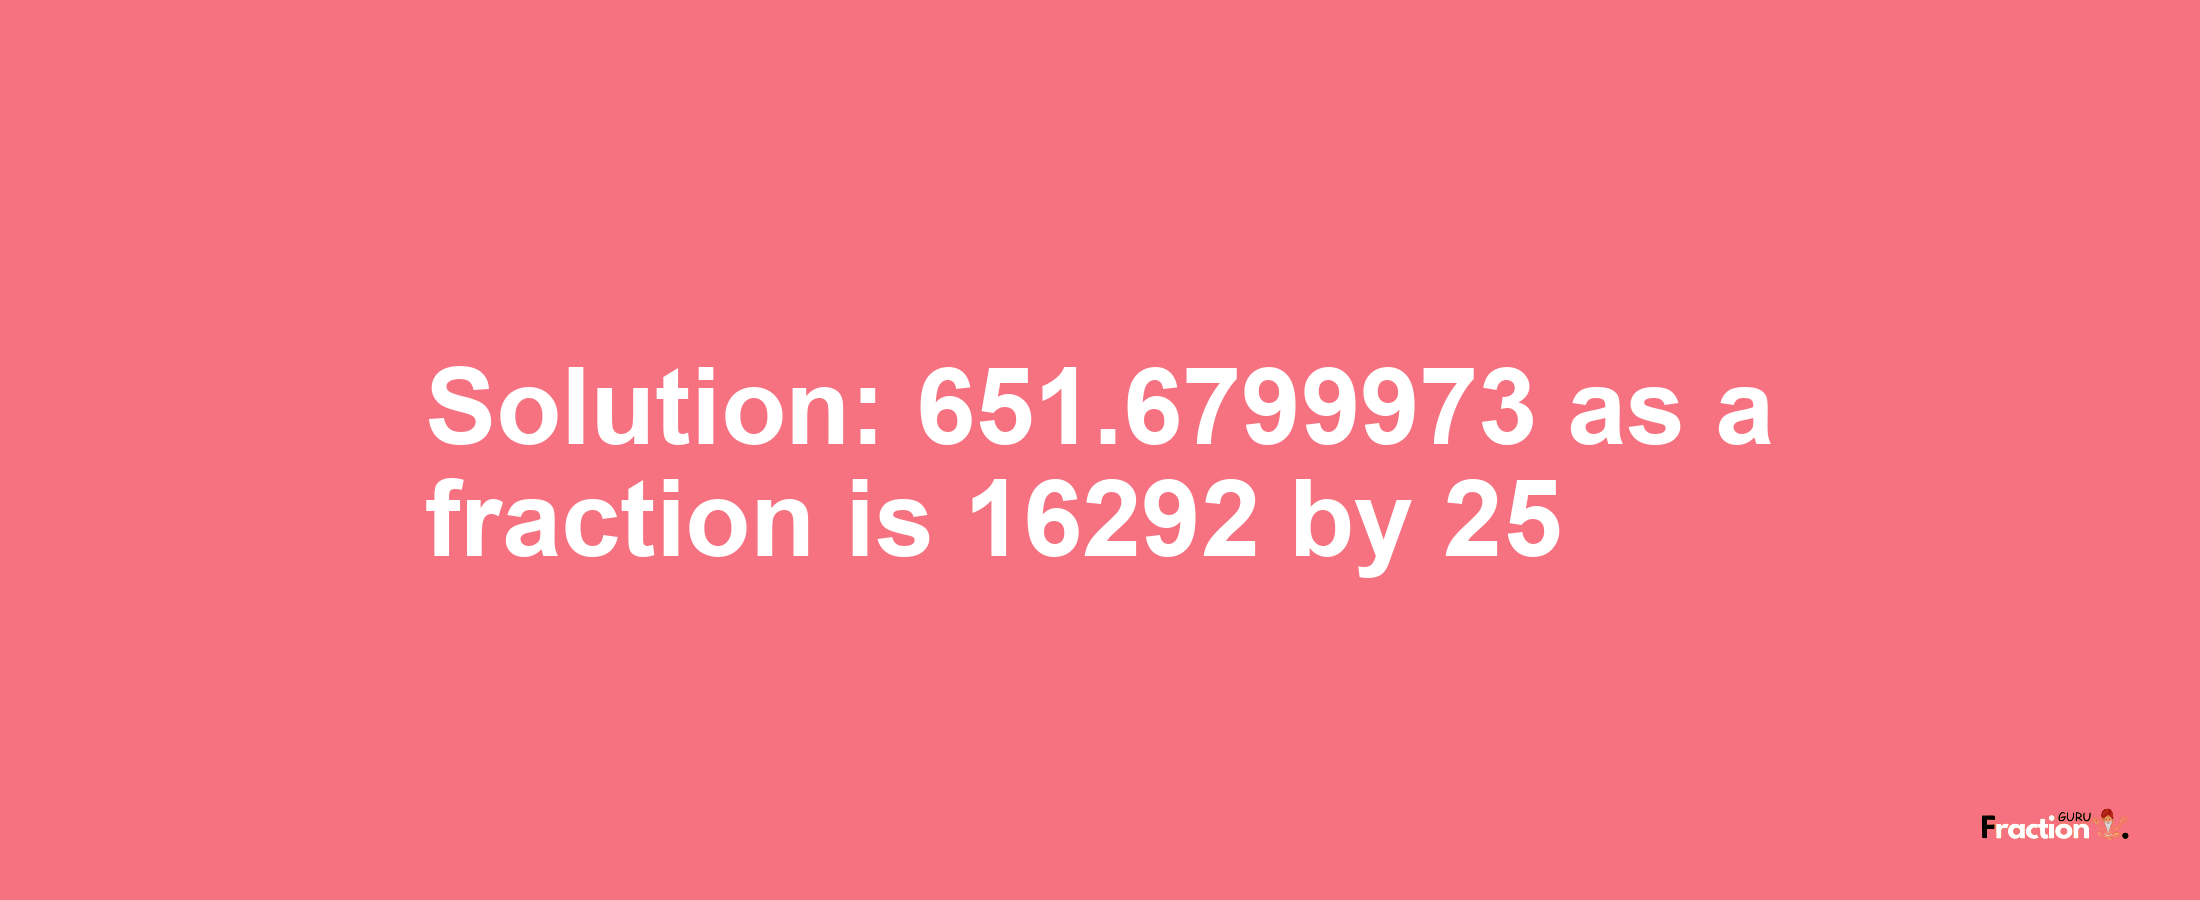 Solution:651.6799973 as a fraction is 16292/25